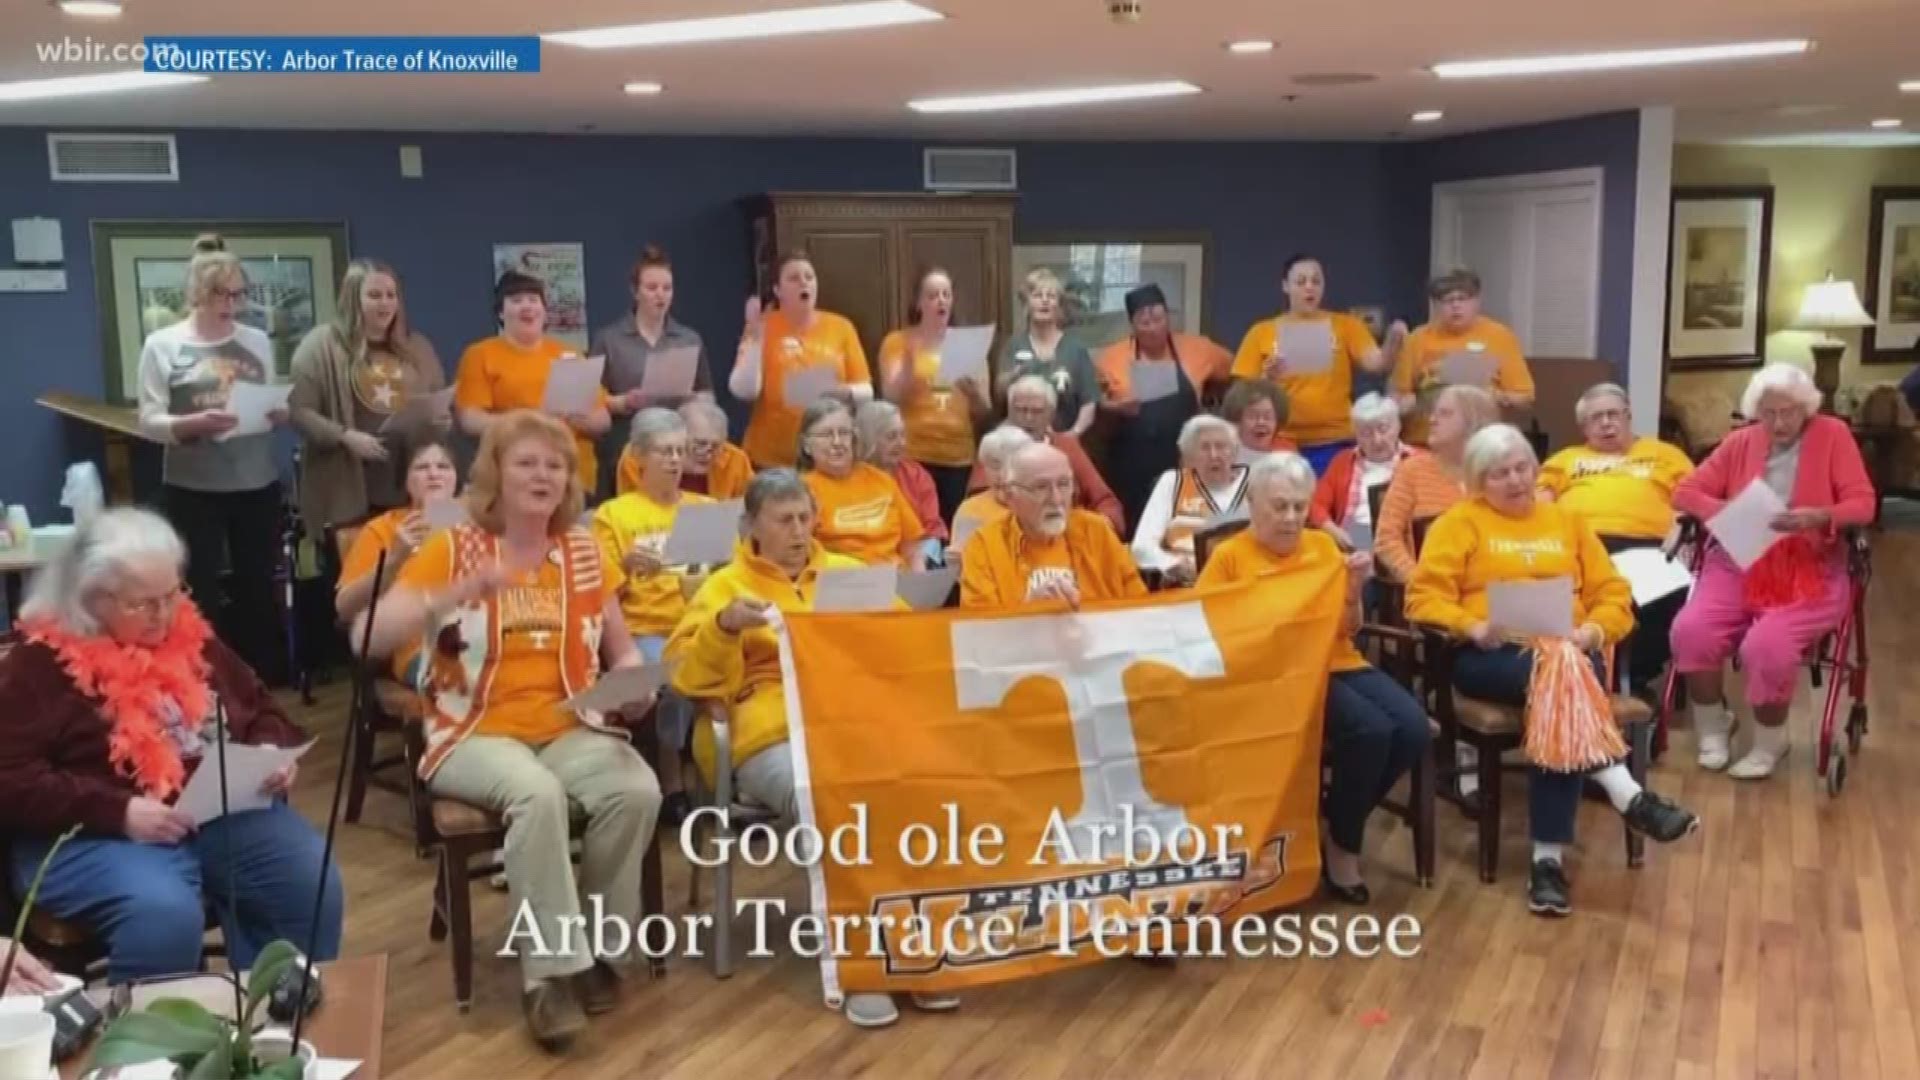 Rocky Top is a song many of us know by heart but one group changed up the words to show their love for their home.